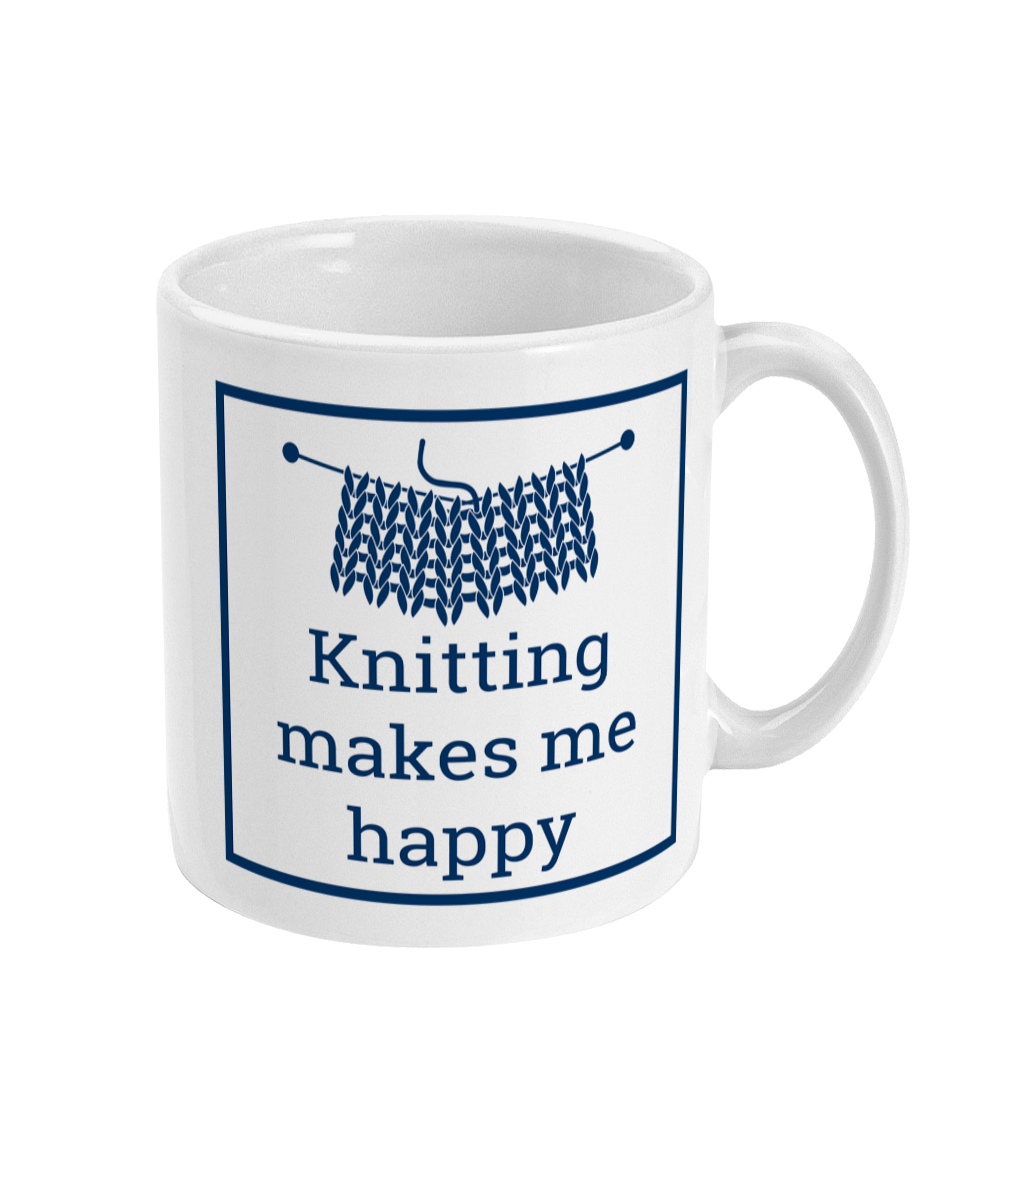 knitting makes me happy printed on a mug with an image of some knitting